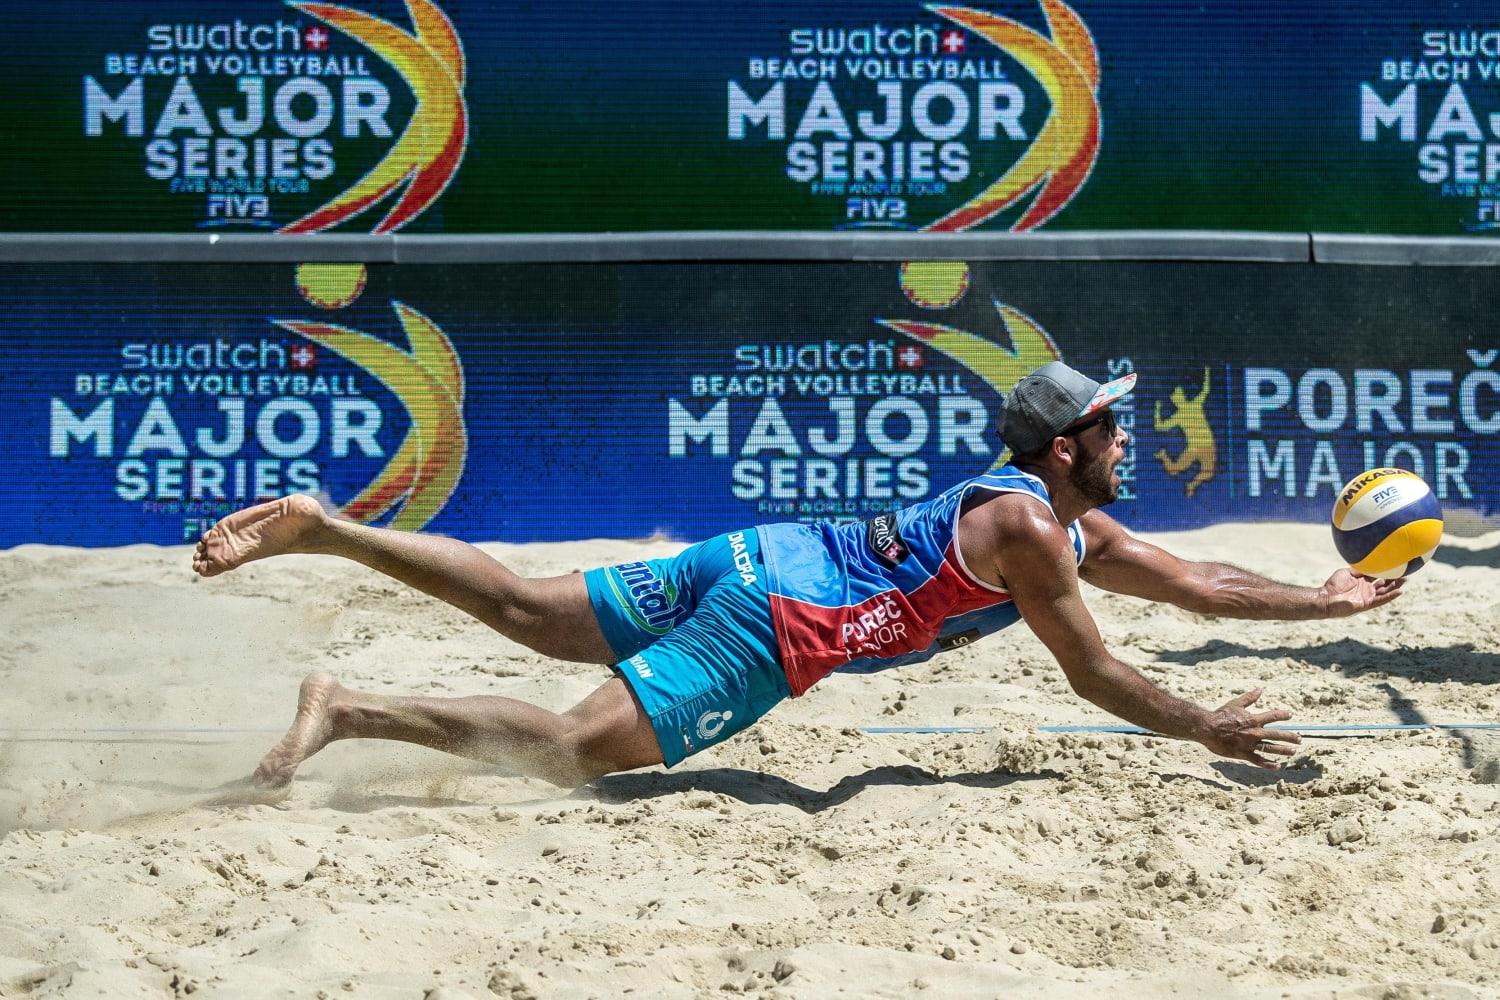 The best dives from the beach volleyball court in